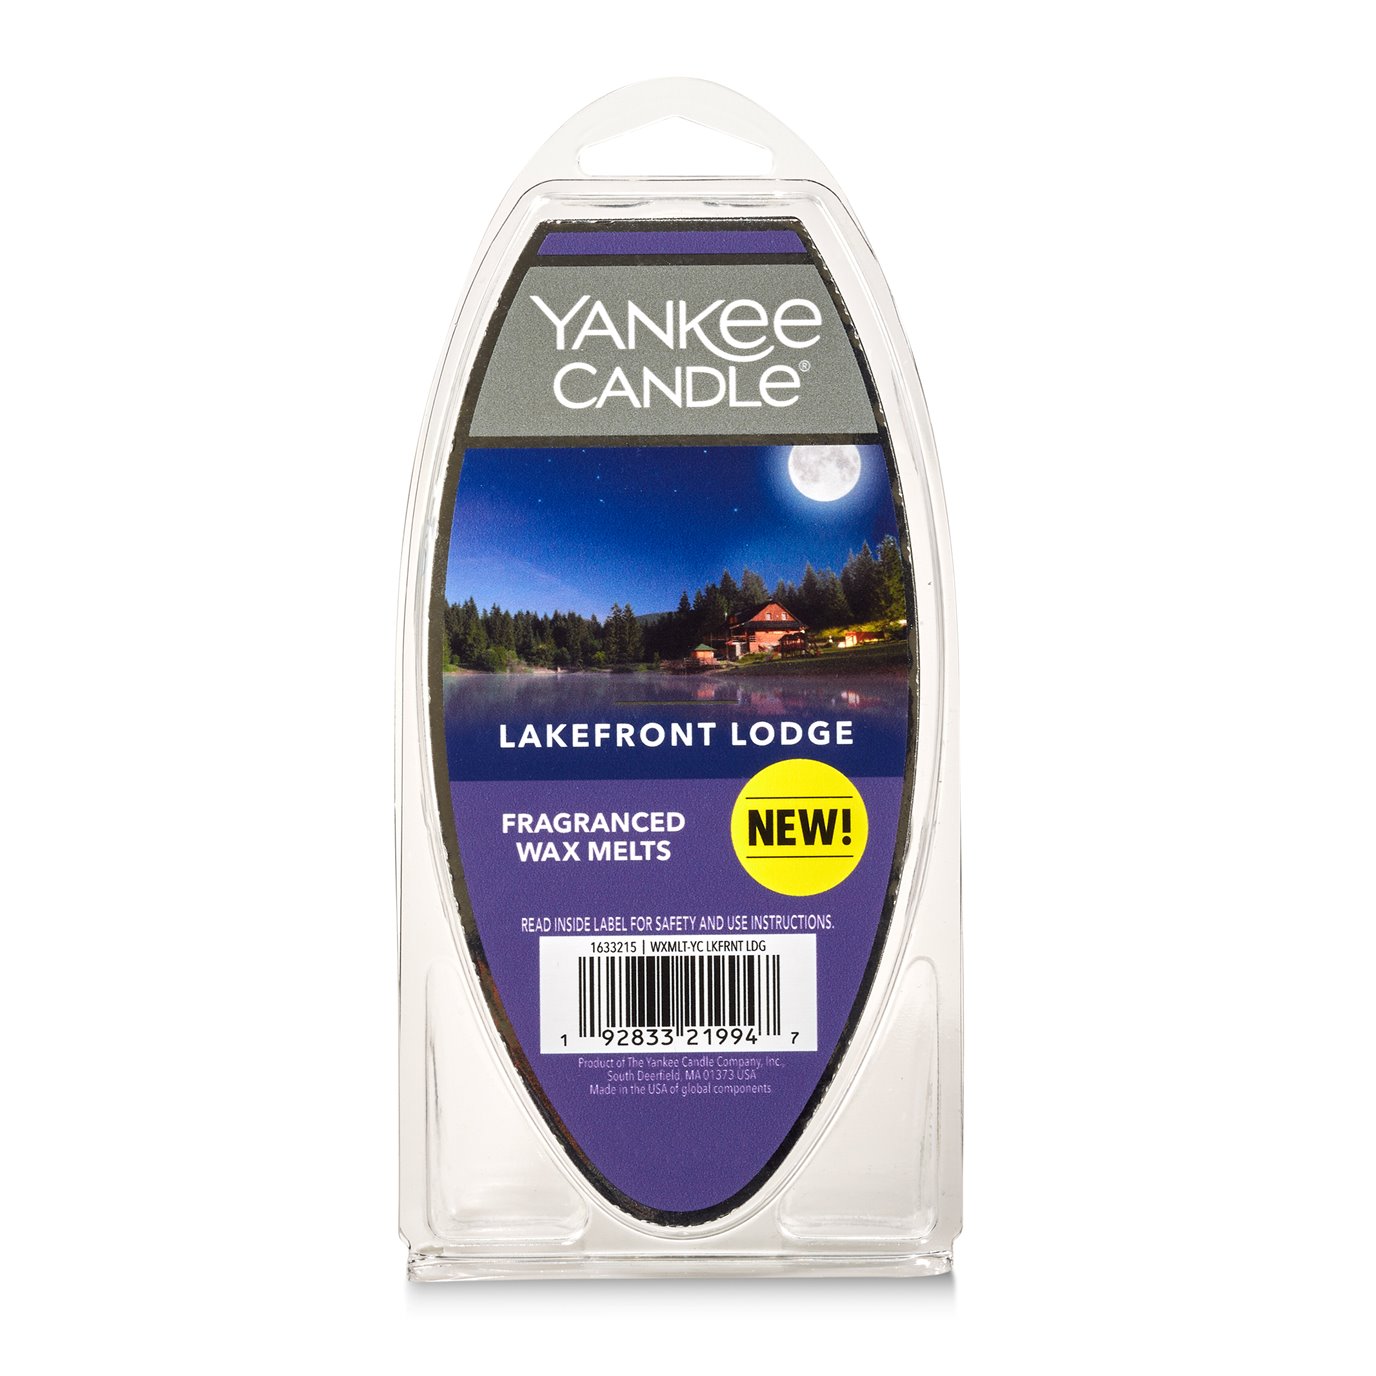 Yankee Candle Lakefront Lodge Wax Melts 6-Pack